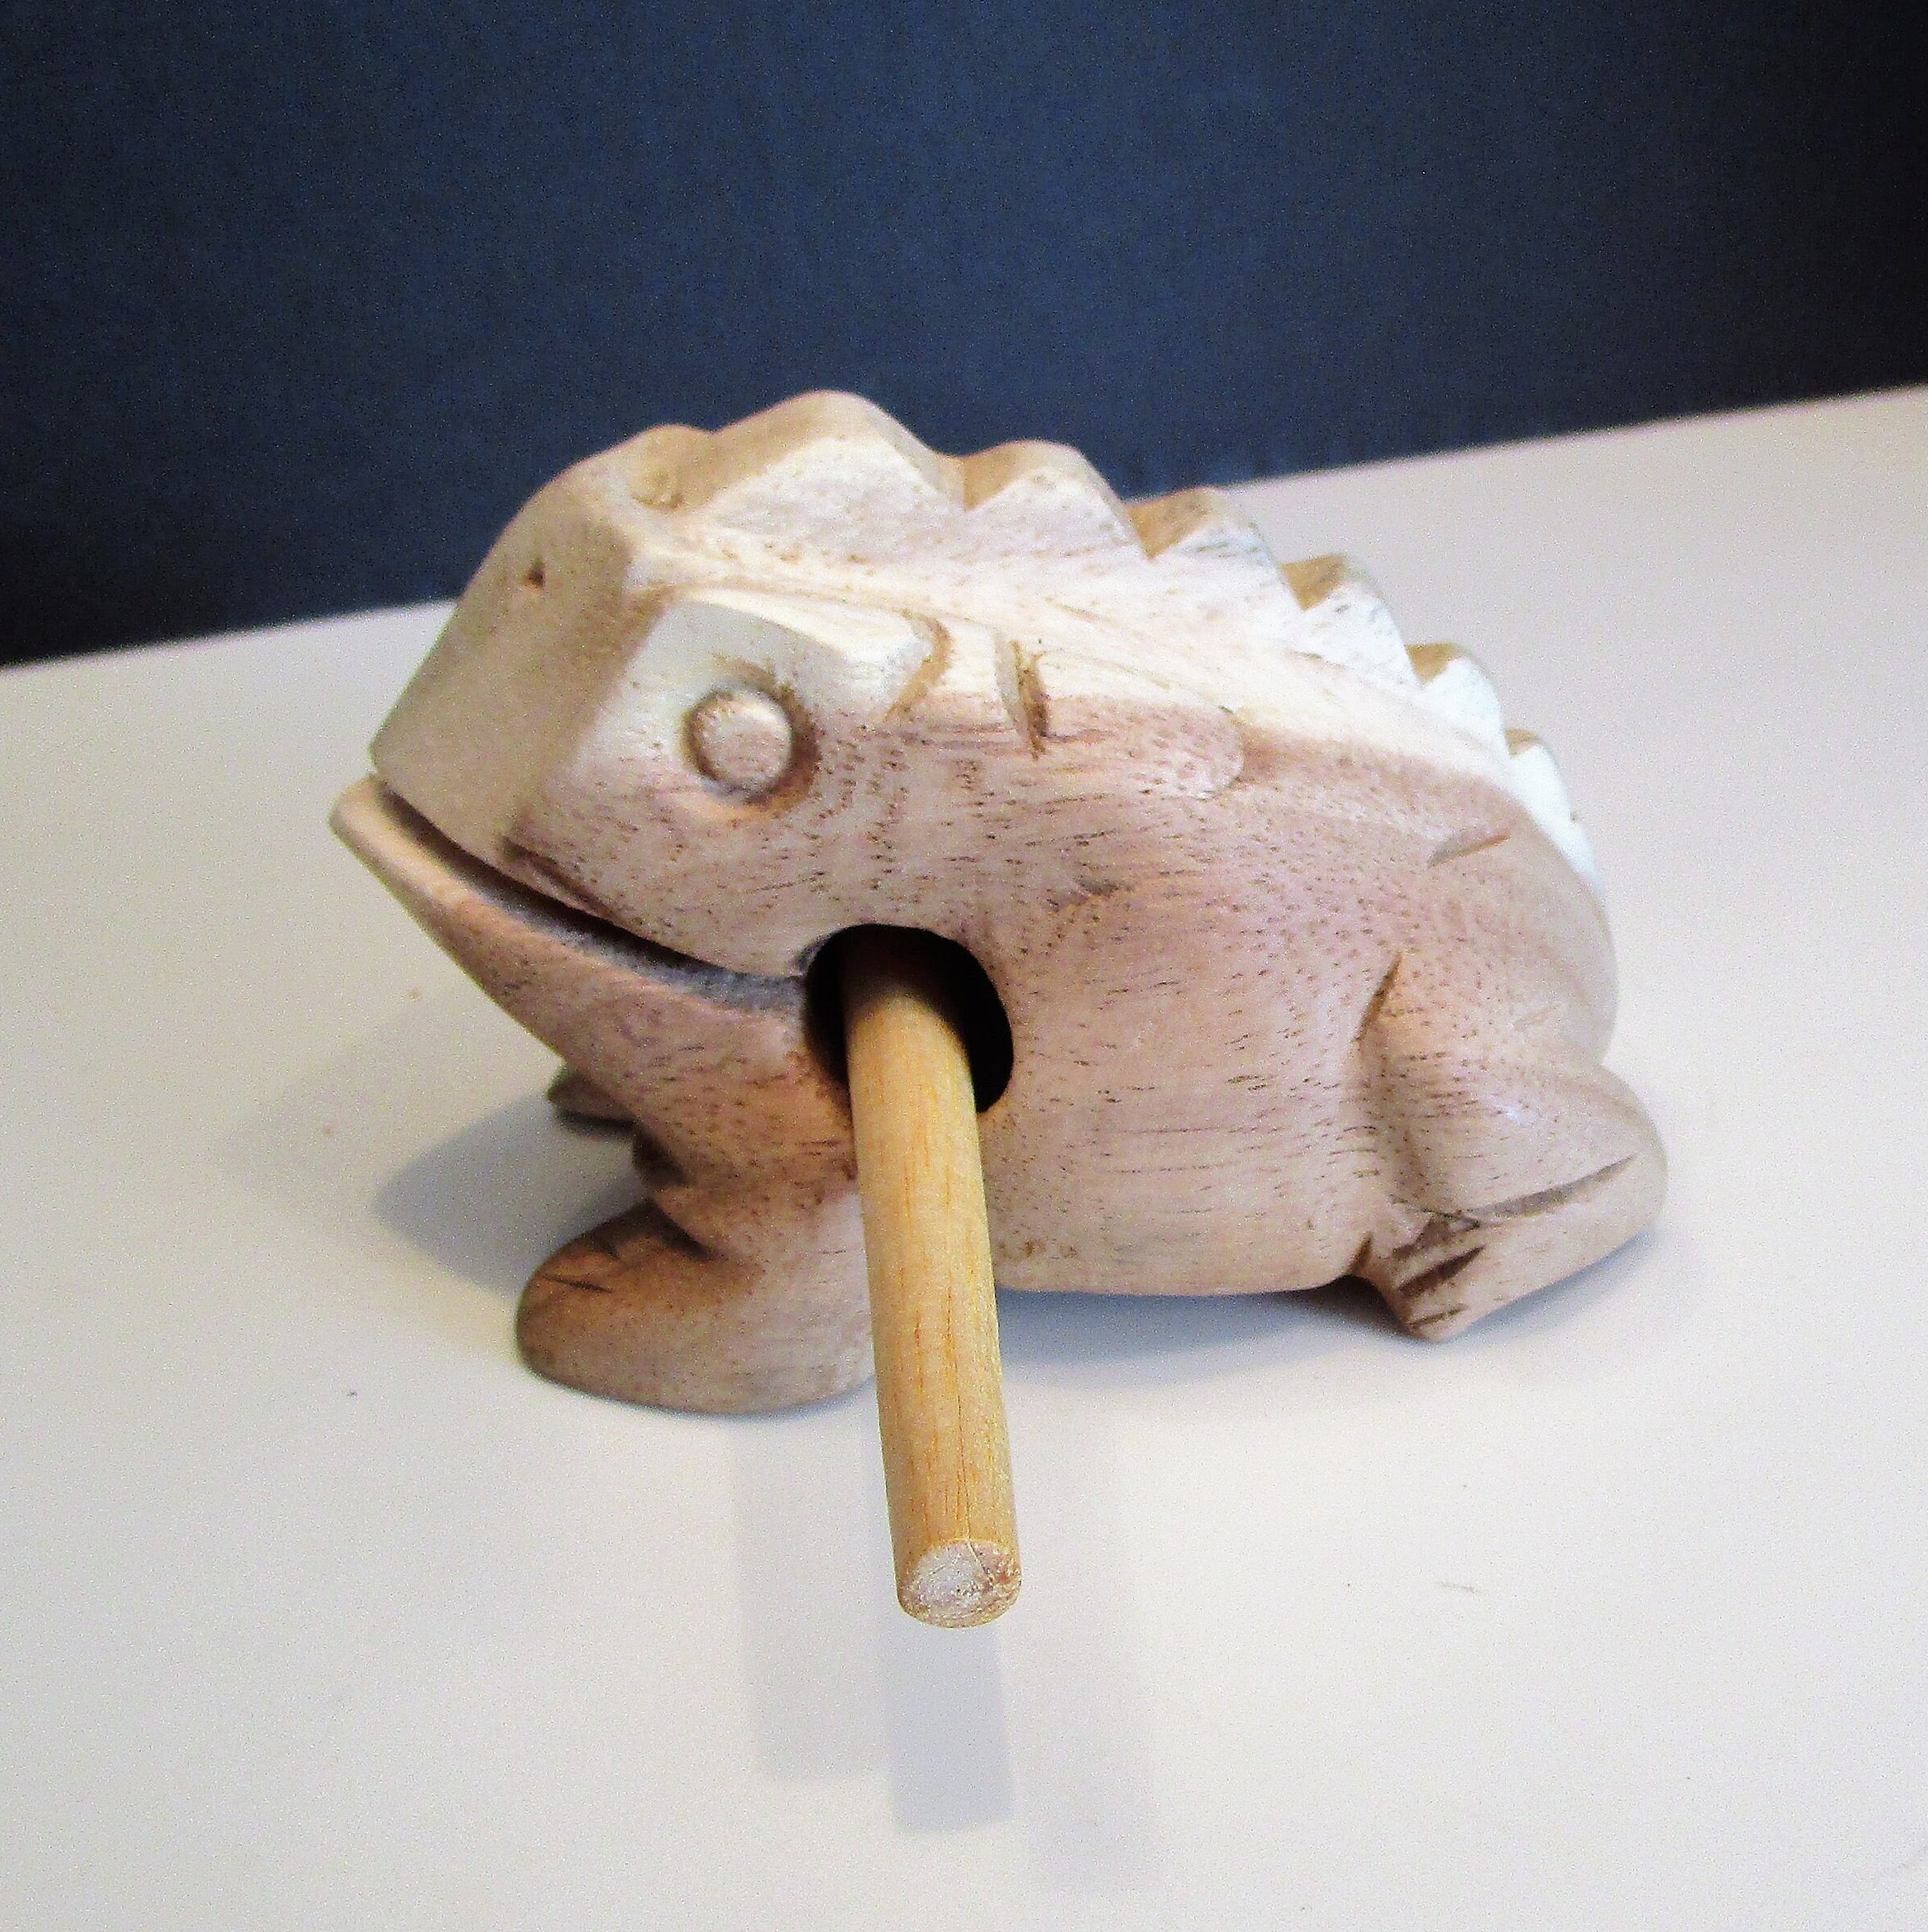 Wood Carved Percussion Frog, Wood Frog, Frog Carved Wood Pencil Holder,  Rustic Home Décor, Musical Wood Frog, Frog Collectible Gift, MER 